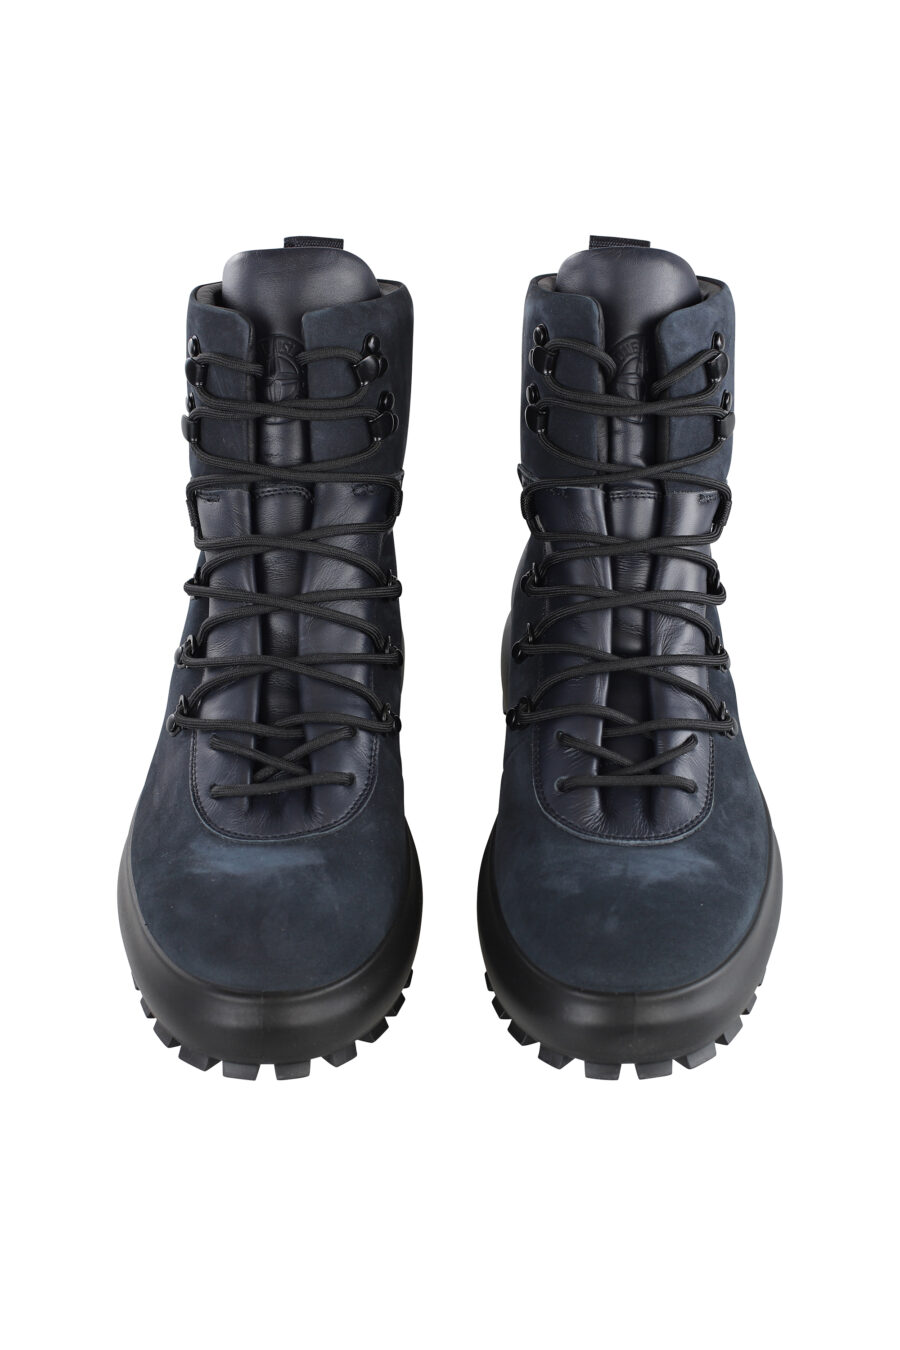 Blue military style lace-up boots - IMG 7098